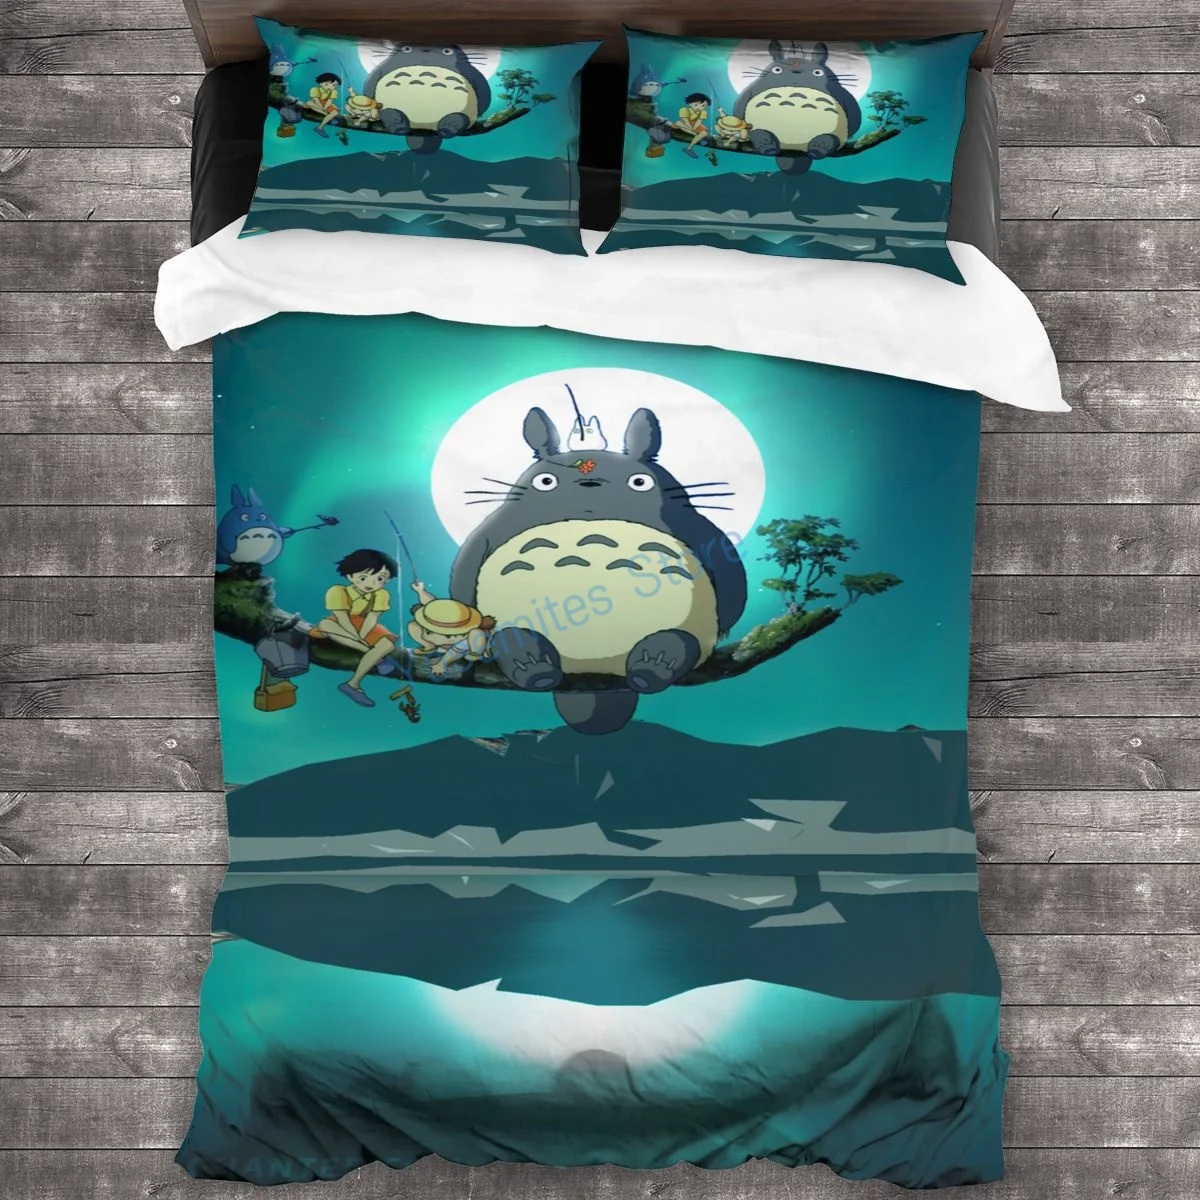 Totoro Duvet, Bedding Set, Bed Three-Piece Set, Animation/Animal/Singer All Available Home Household Bedding Quilt